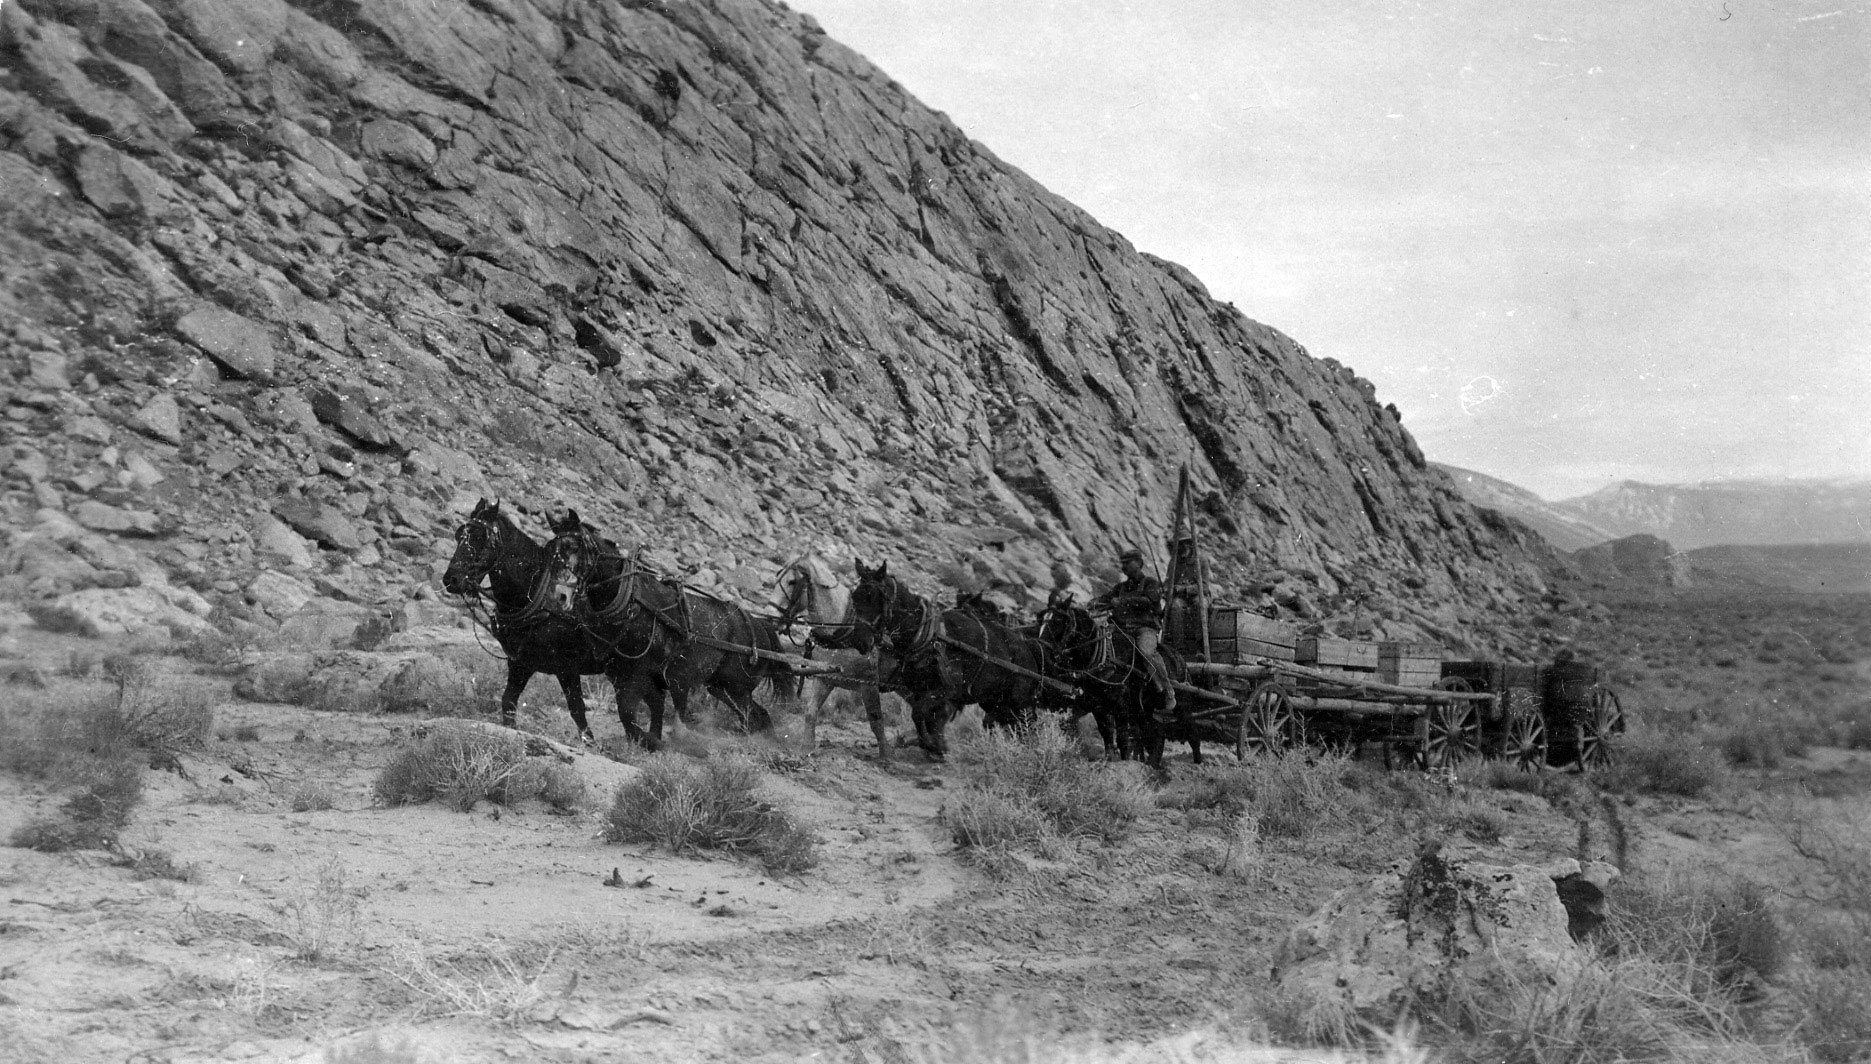 Black-and-white photograph of six horses pulling a wooden wagon . Men sit on the two rear horses. The wagon has wooden crates carrying dinosaur bones on it. A second wagon appears to be attached behind the first.